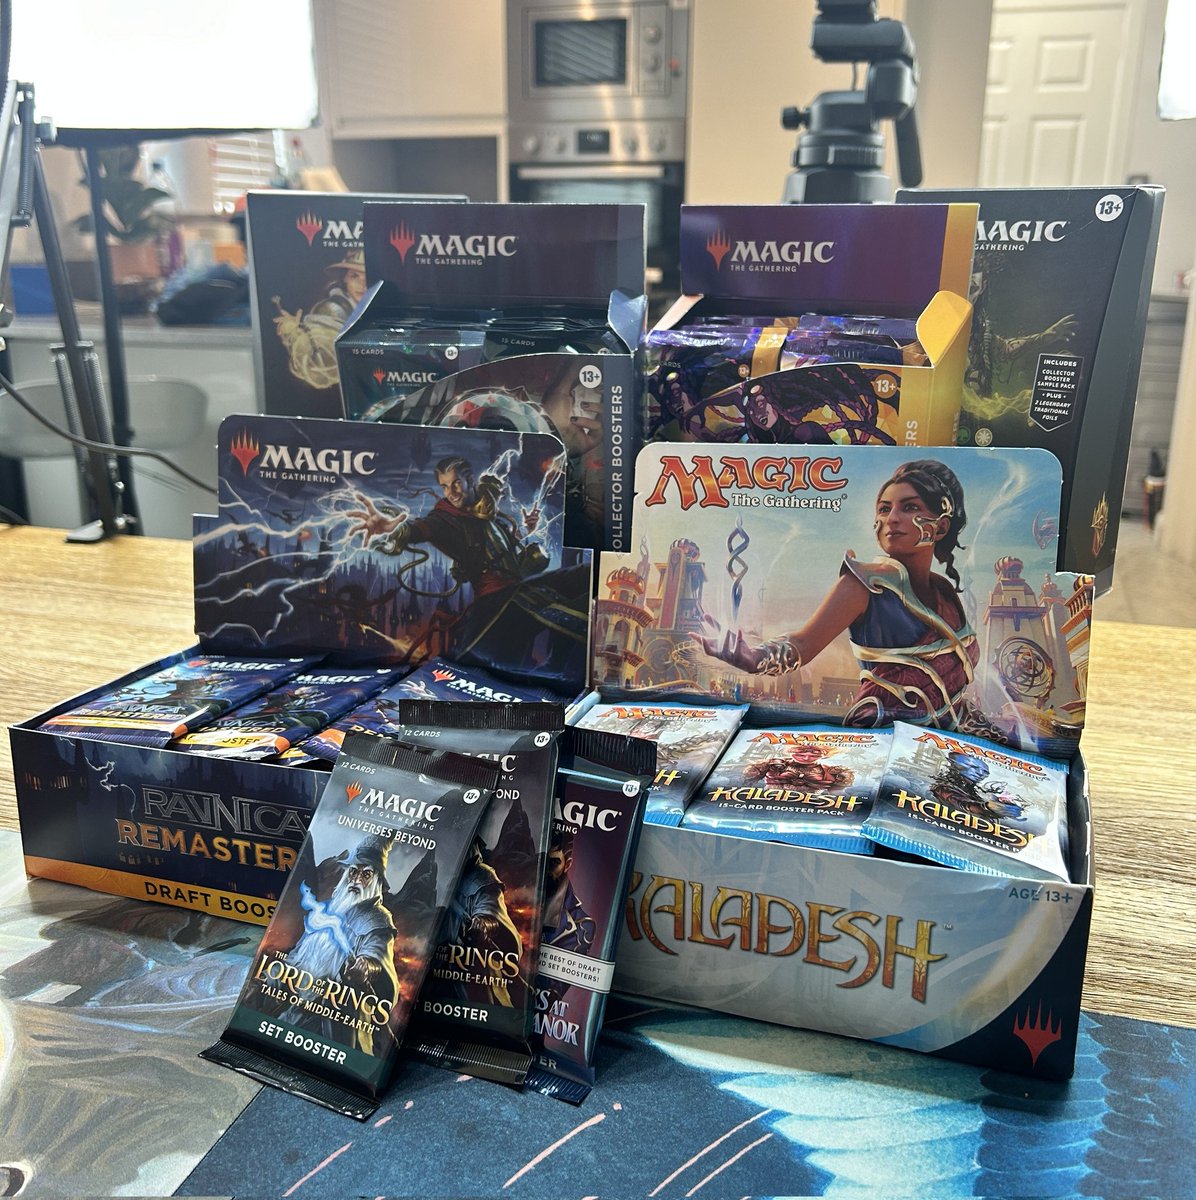 We are live at 6pm! So hyped for our Whatnotcon stream! Don't forget you can win the commander decks!

See you shortly!